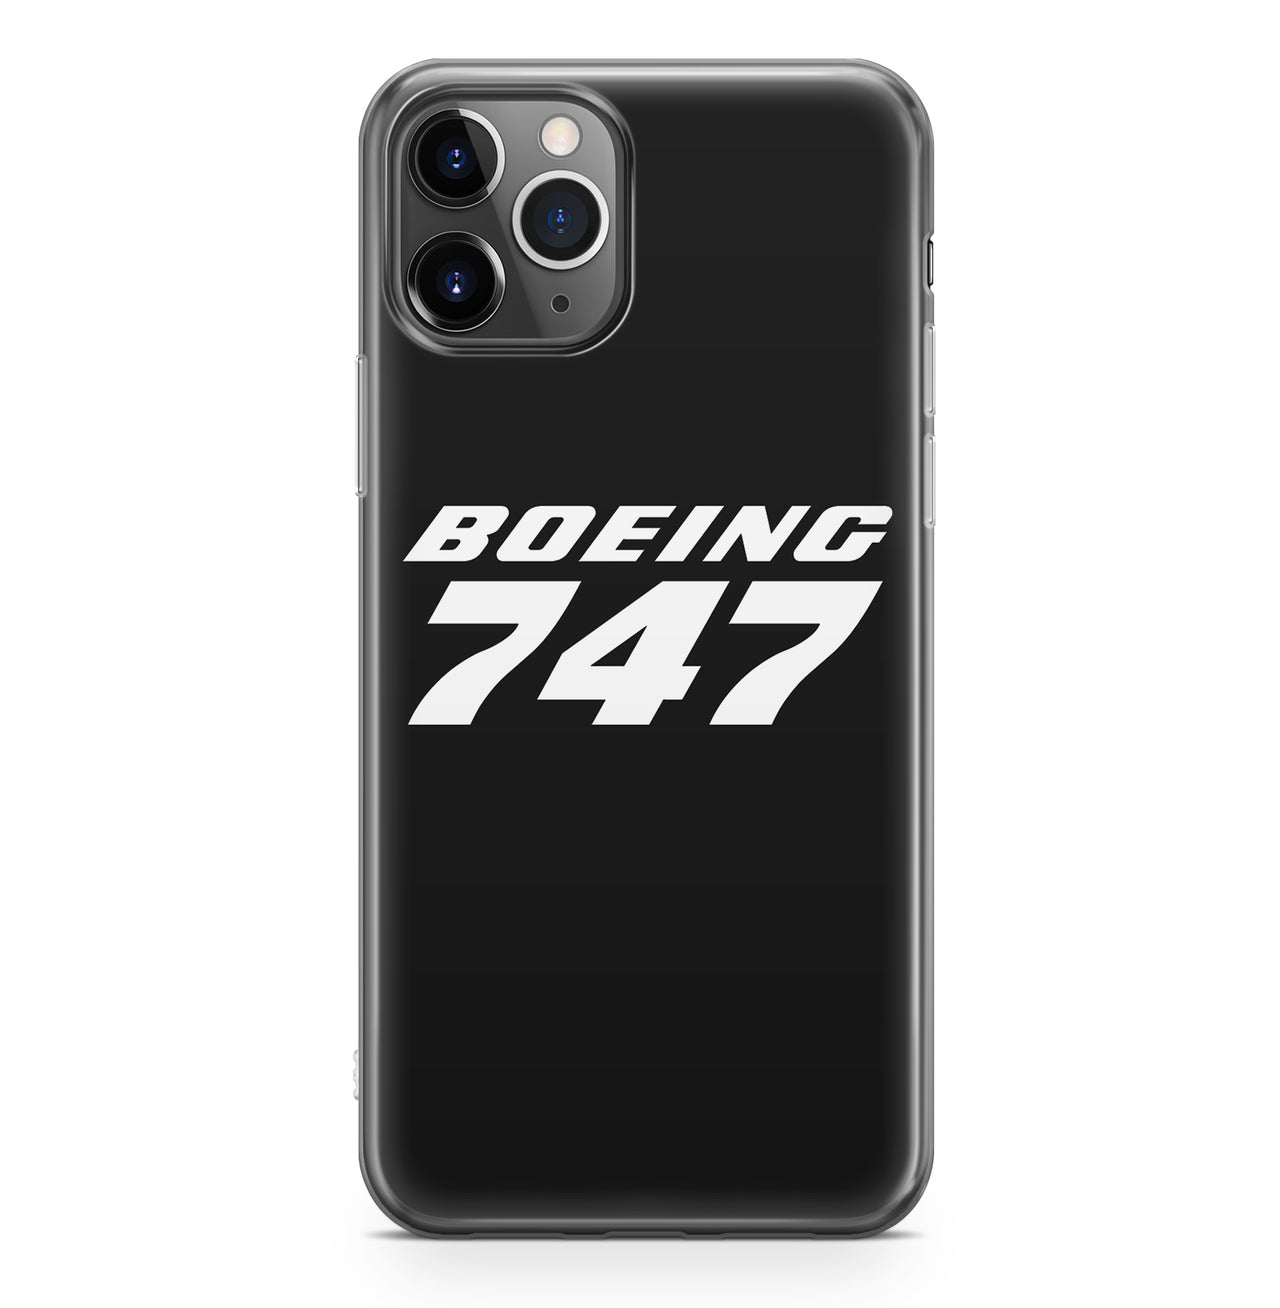 Boeing 747 & Text Designed iPhone Cases